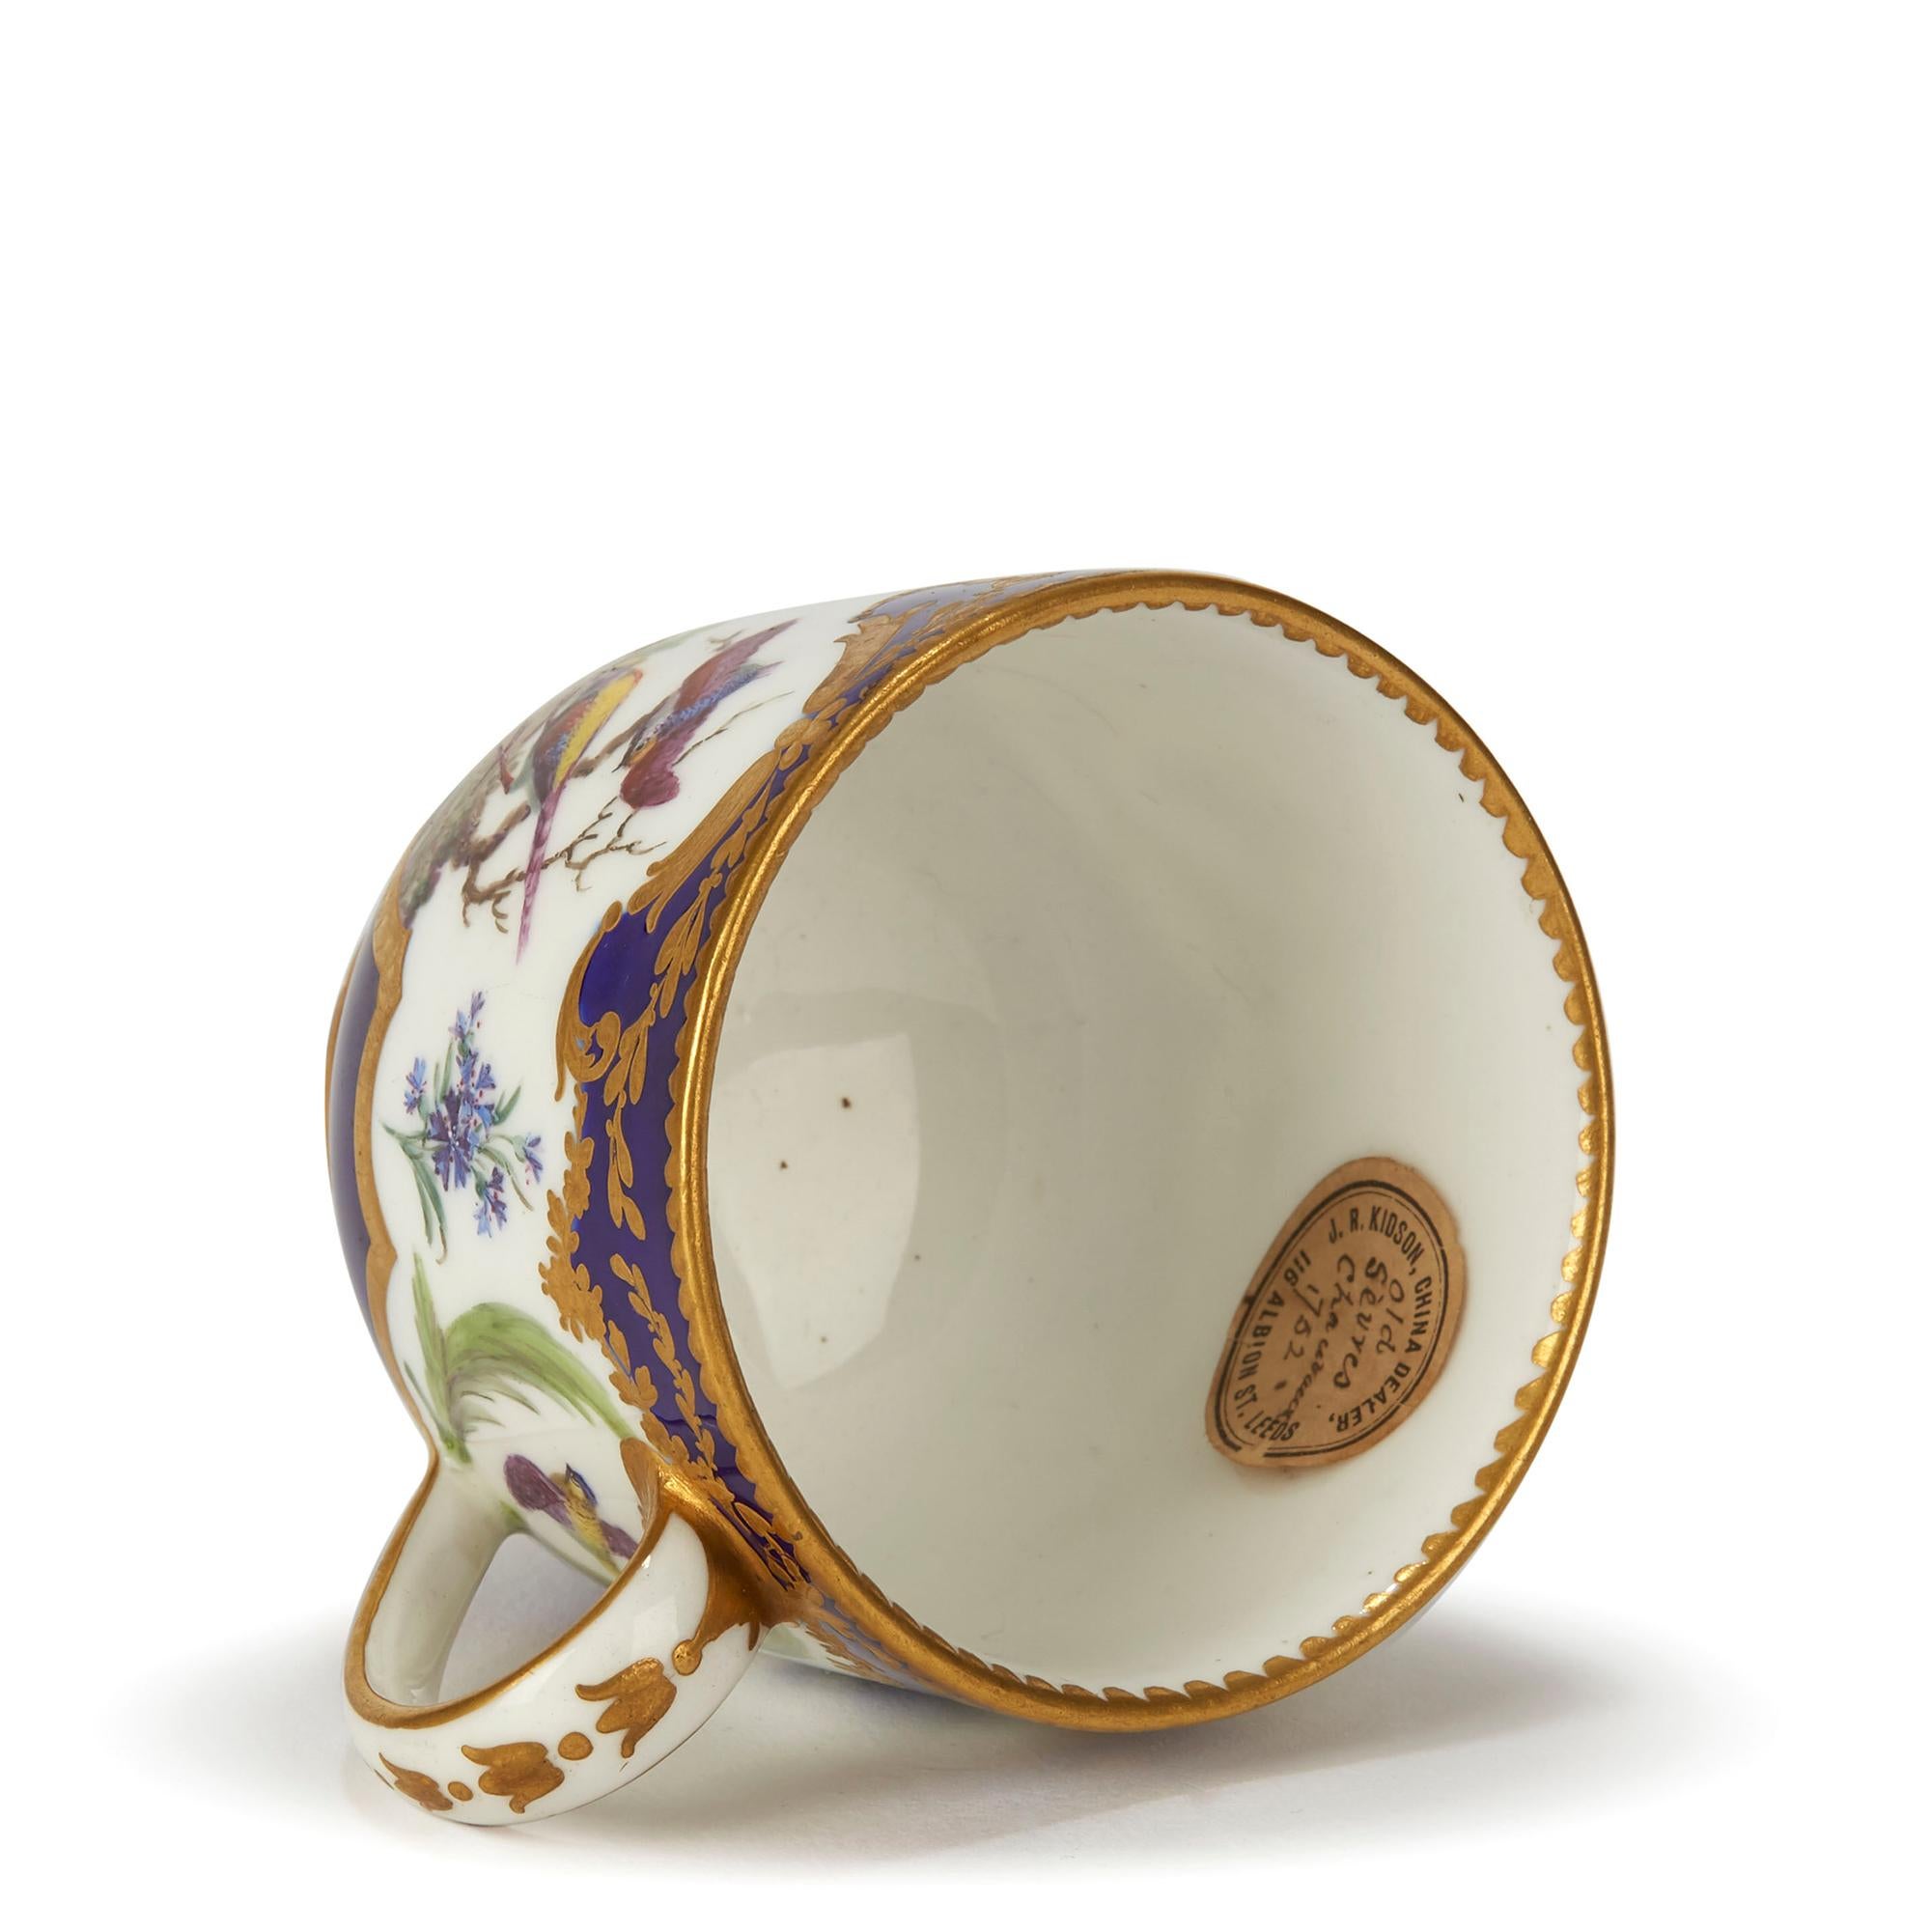 Rococo Sèvres French Porcelain Hand Painted and Gilded Teacup, circa 1752